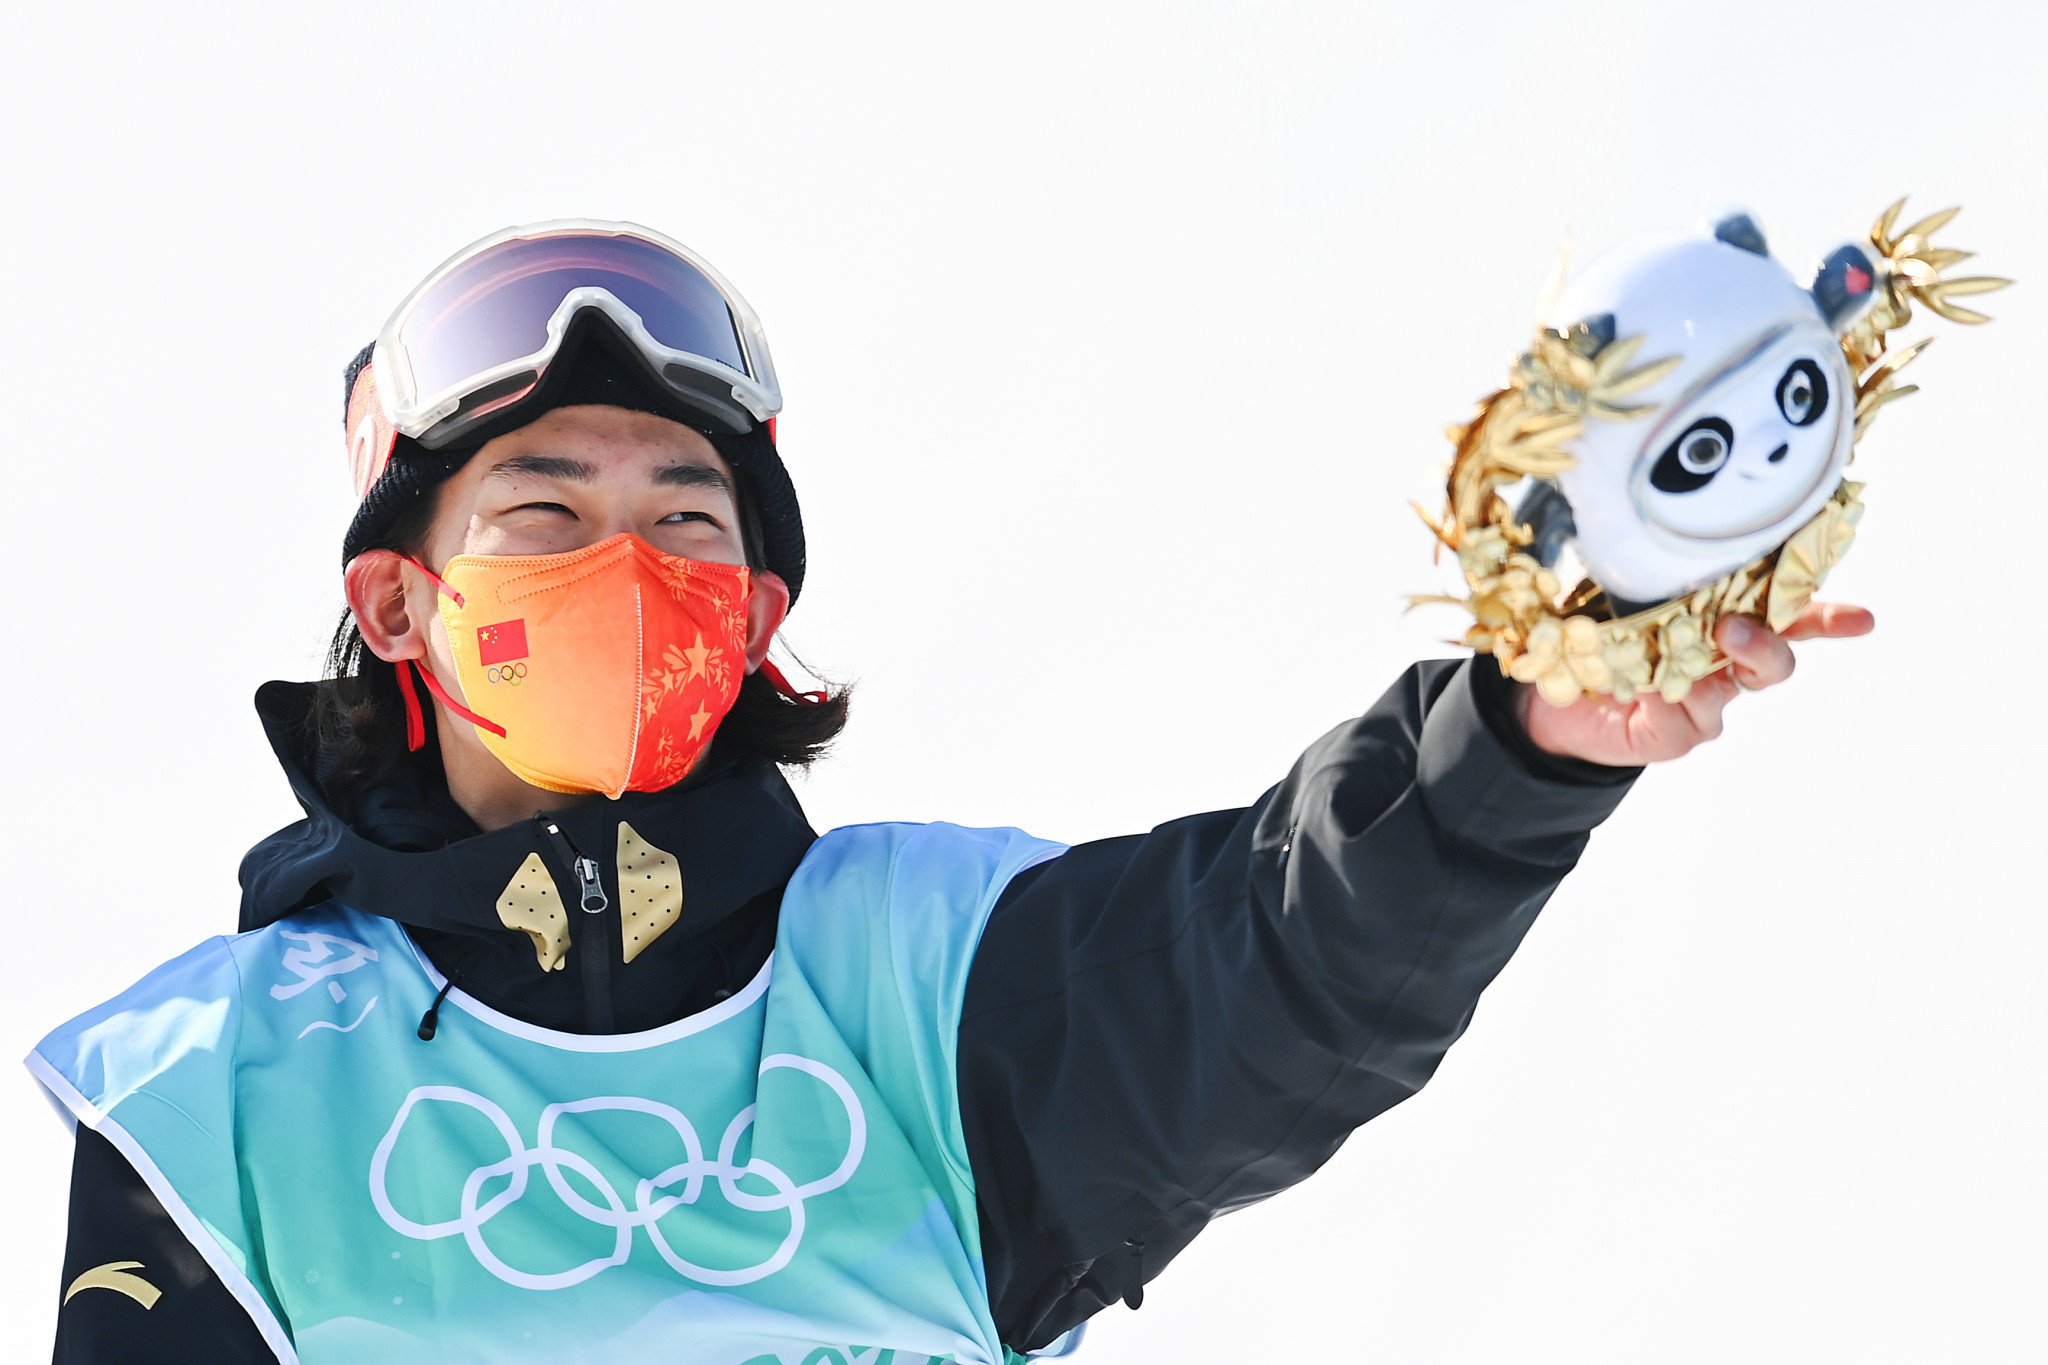 China's Su Yiming put together two strong runs to win the men's snowboard big air final three days before his 18th birthday ©Getty Images